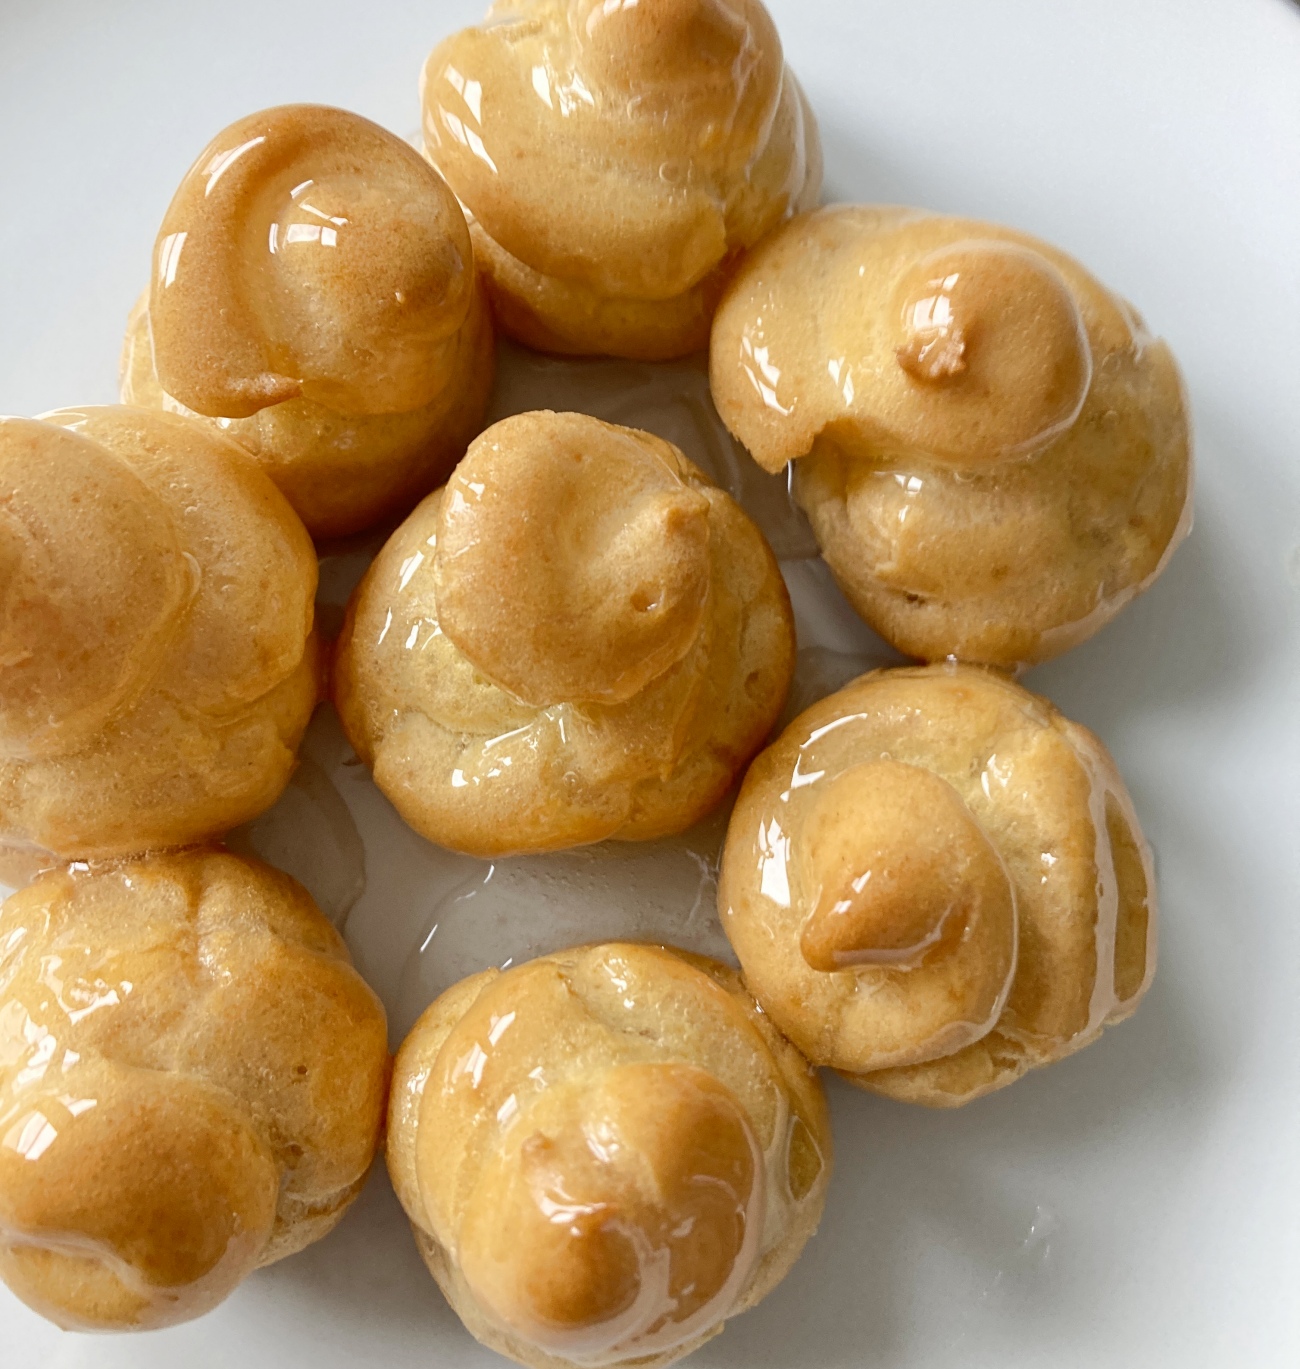 Transfer to a heat-proof bowl and allow to cool for 5 minutes. Dunk each pastry in glaze, then assemble on a plate in a stacked pyramid or cone shape, with 7-10 profiteroles on the first layer and decreasing in number until only one ball is on top. Allow to set for 20 minutes.